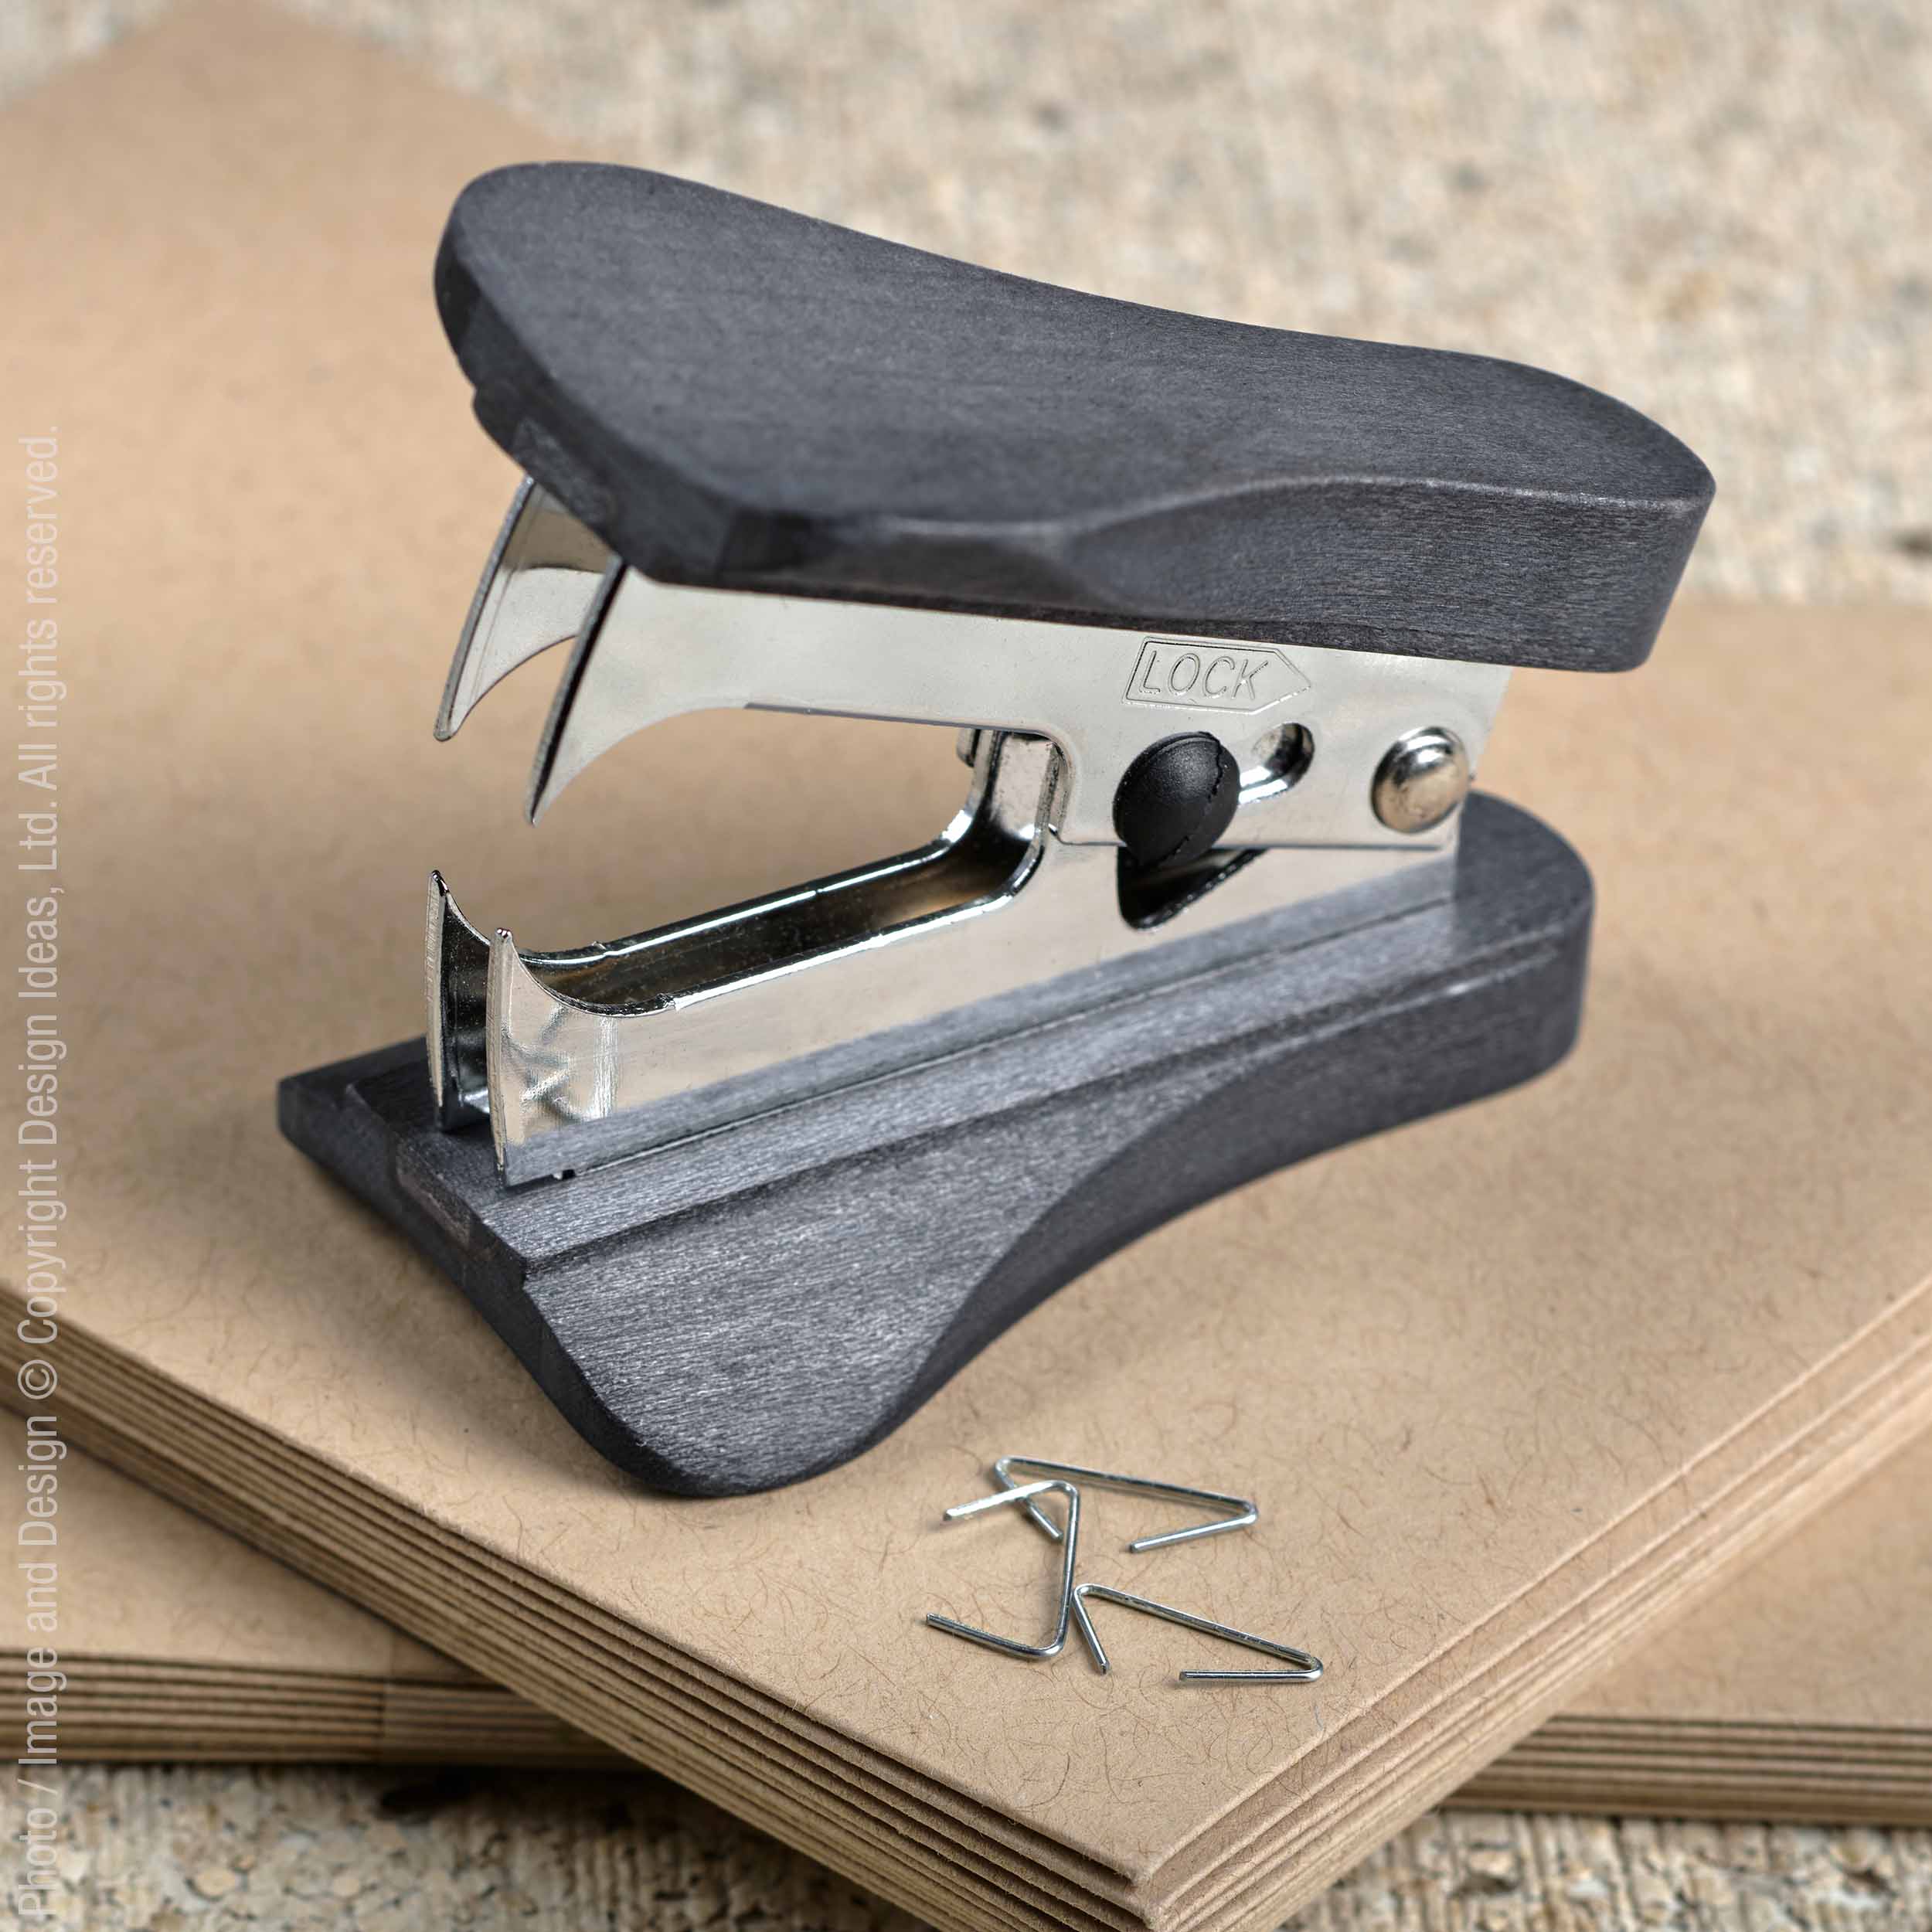 Cokala™ staple remover - Black | Image 1 | Premium Desk Accessory from the Cokala collection | made with Sycamore for long lasting use | texxture